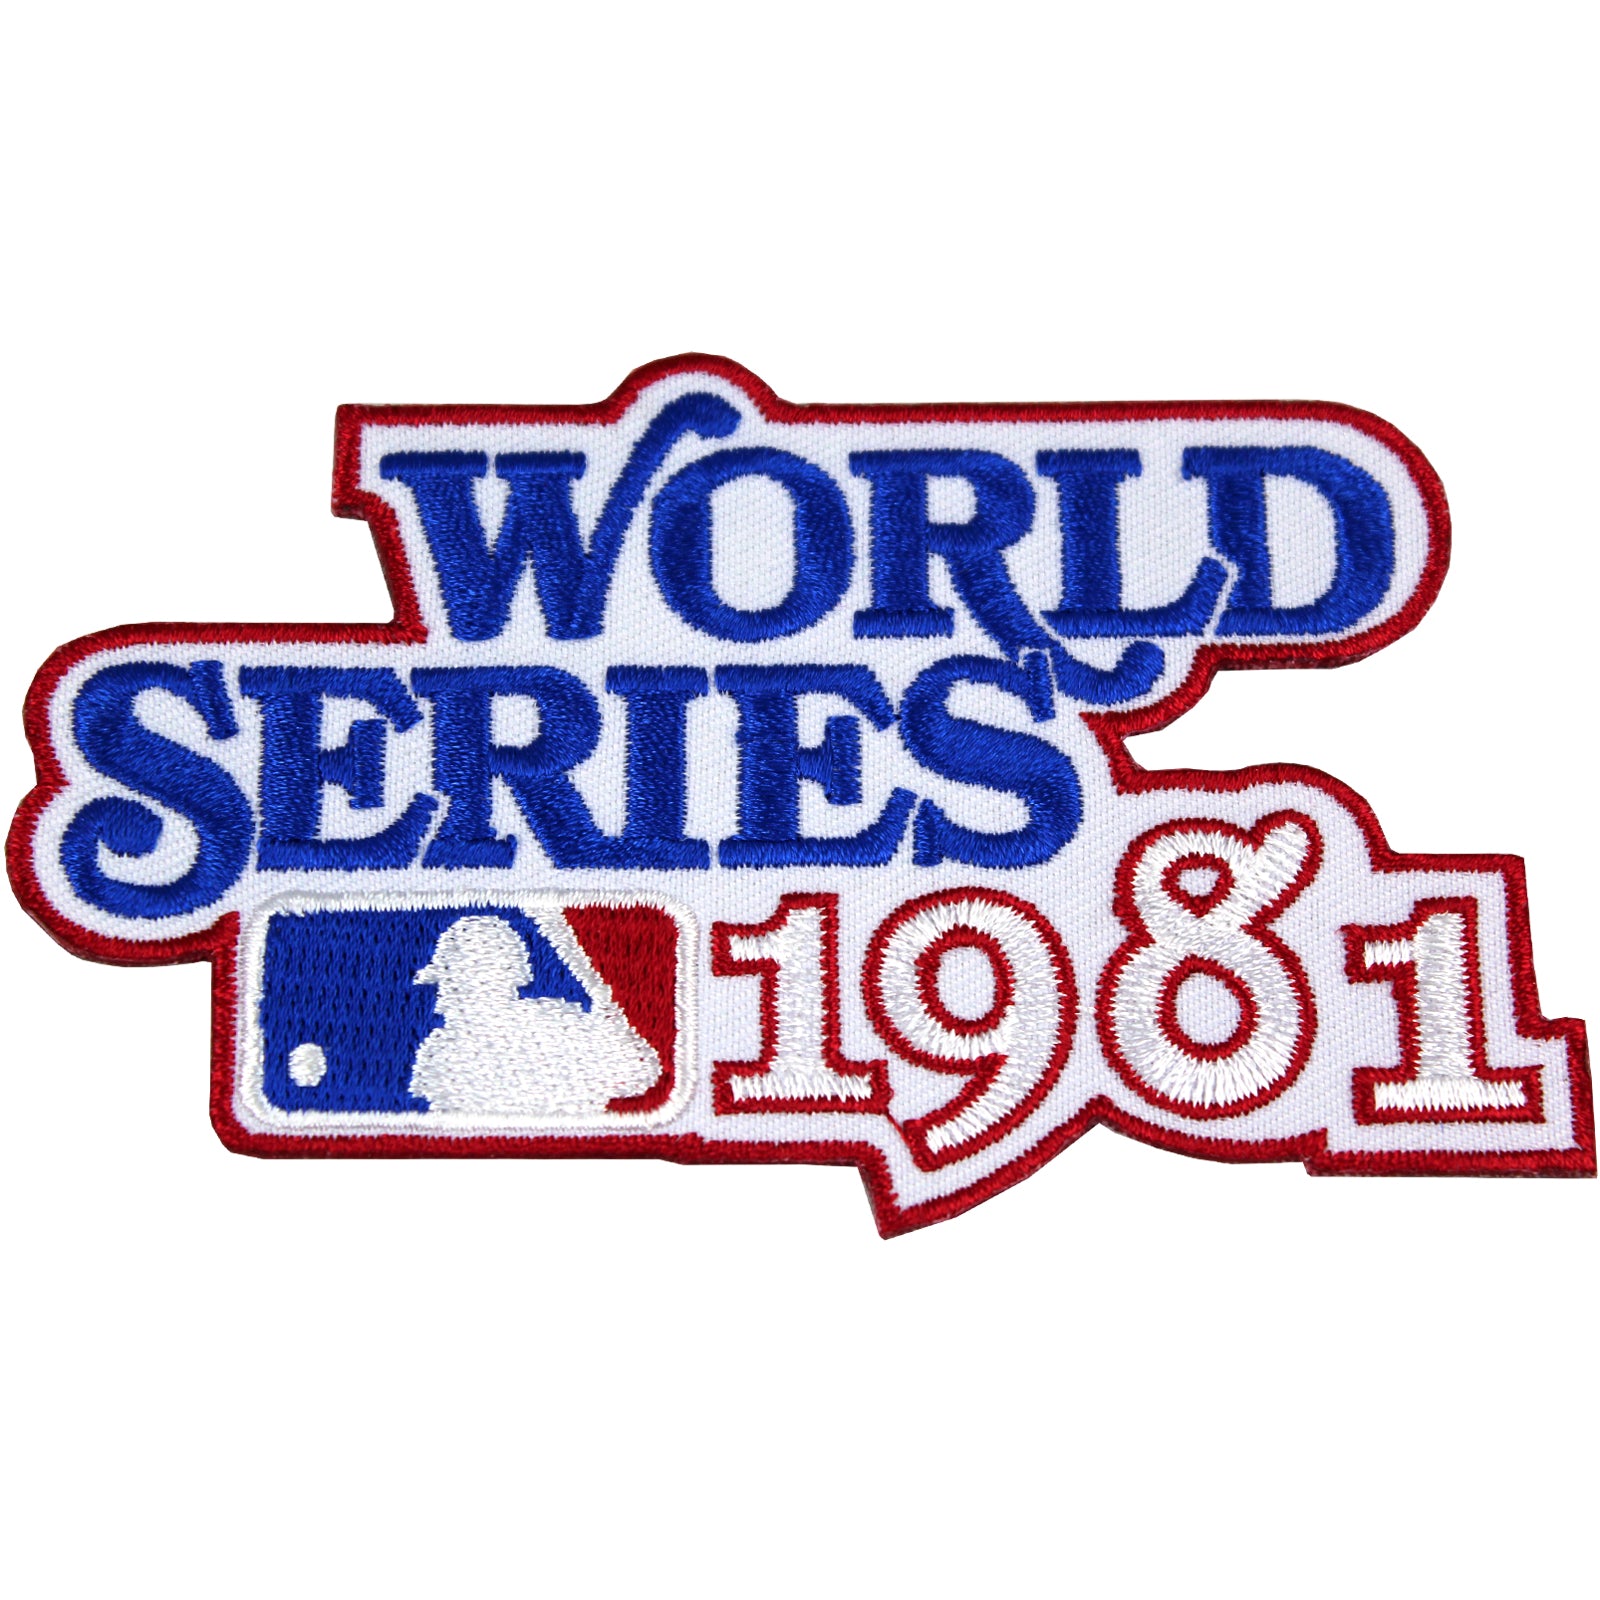 1981 MLB World Series Logo Jersey Patch Los Angeles Dodgers vs. New York Yankees by Patch Collection